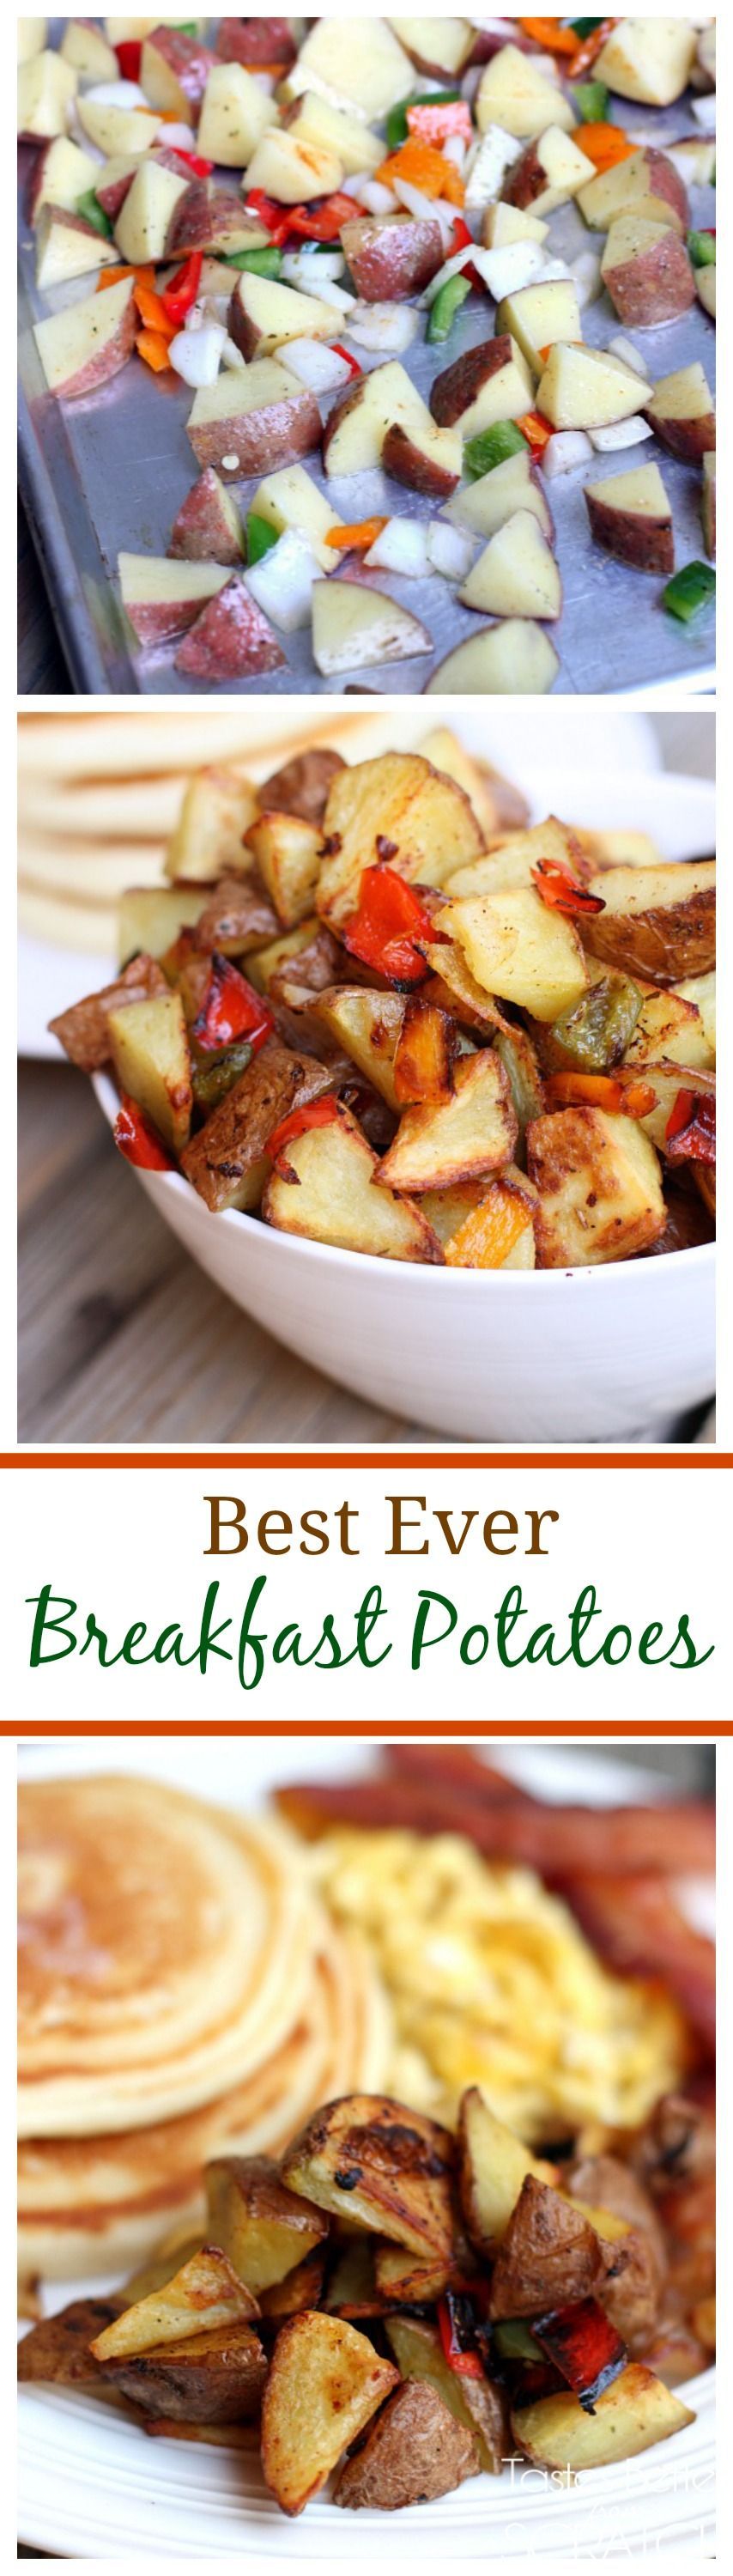 These are the best Breakfast Potatoes Ever! So easy to make and roasted with bell peppers and onion.